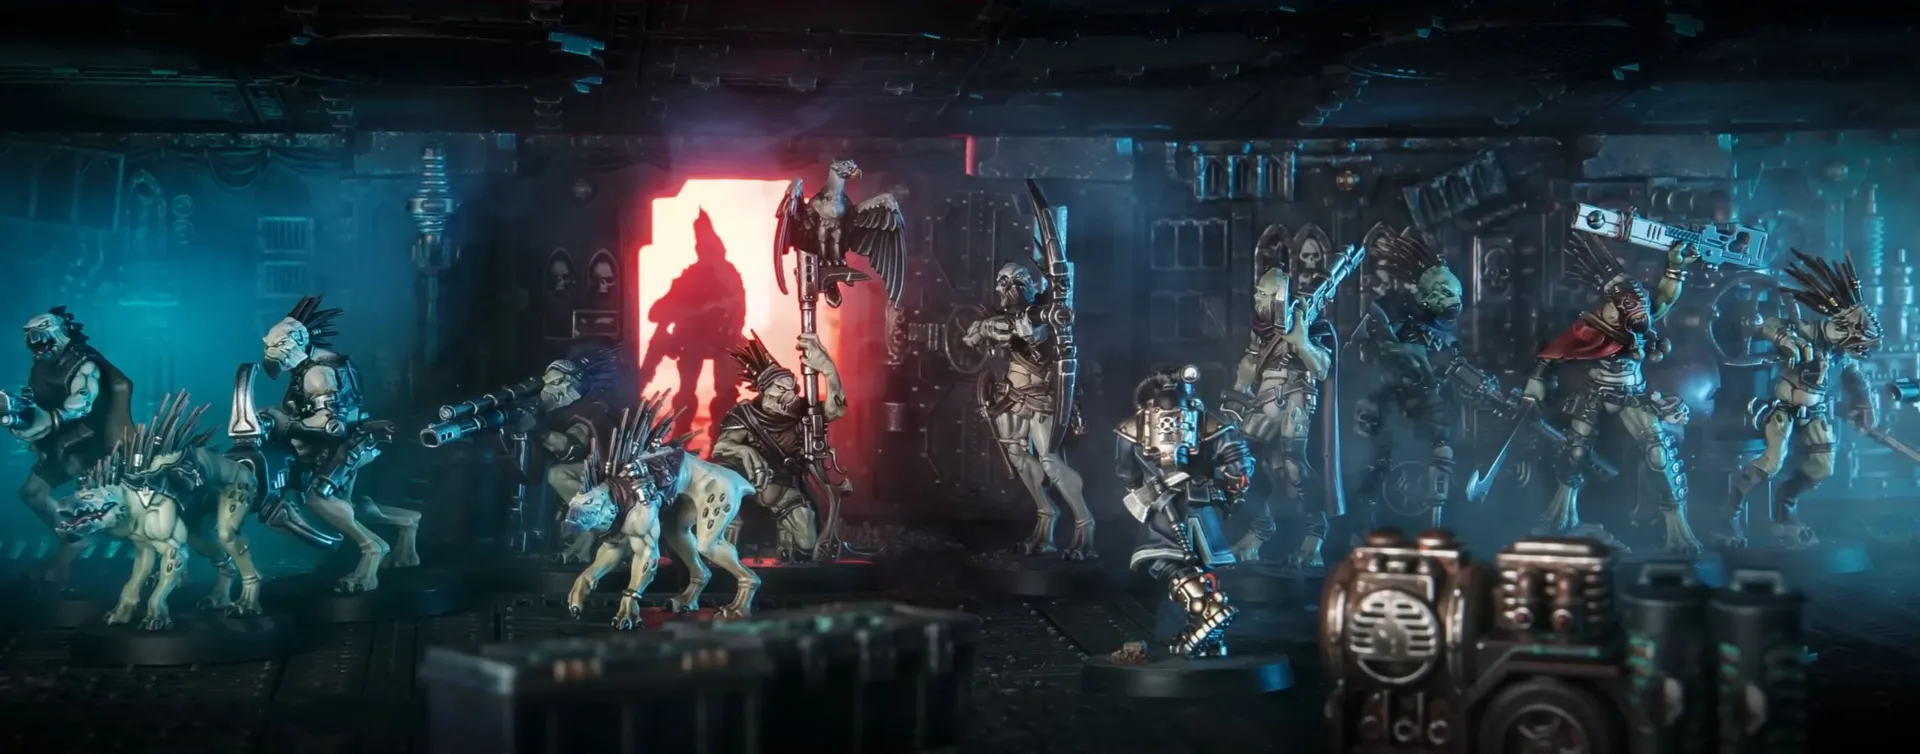 Kill Team: Into the Dark is only the start of a massive new tale in the 40K world